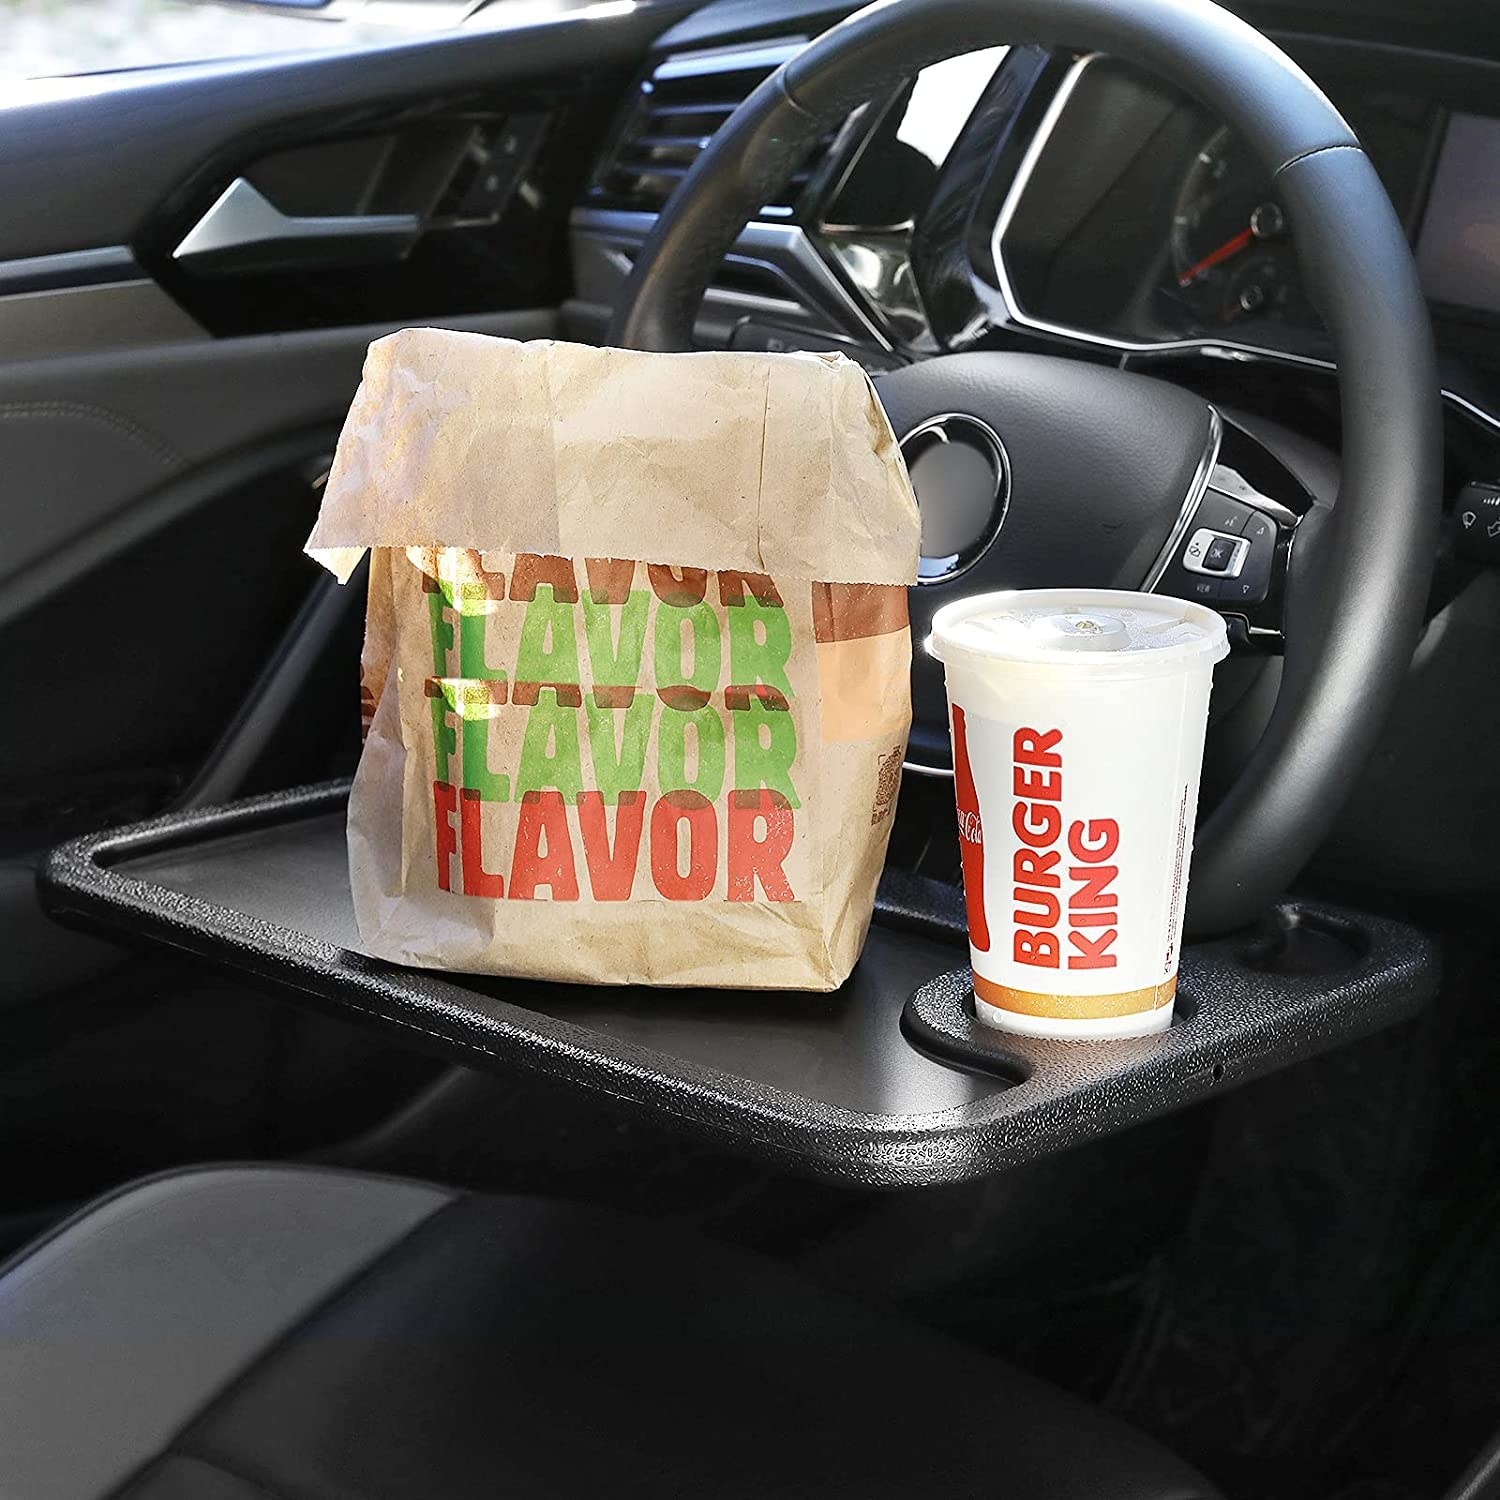 fast food on the steering wheel tray in a car